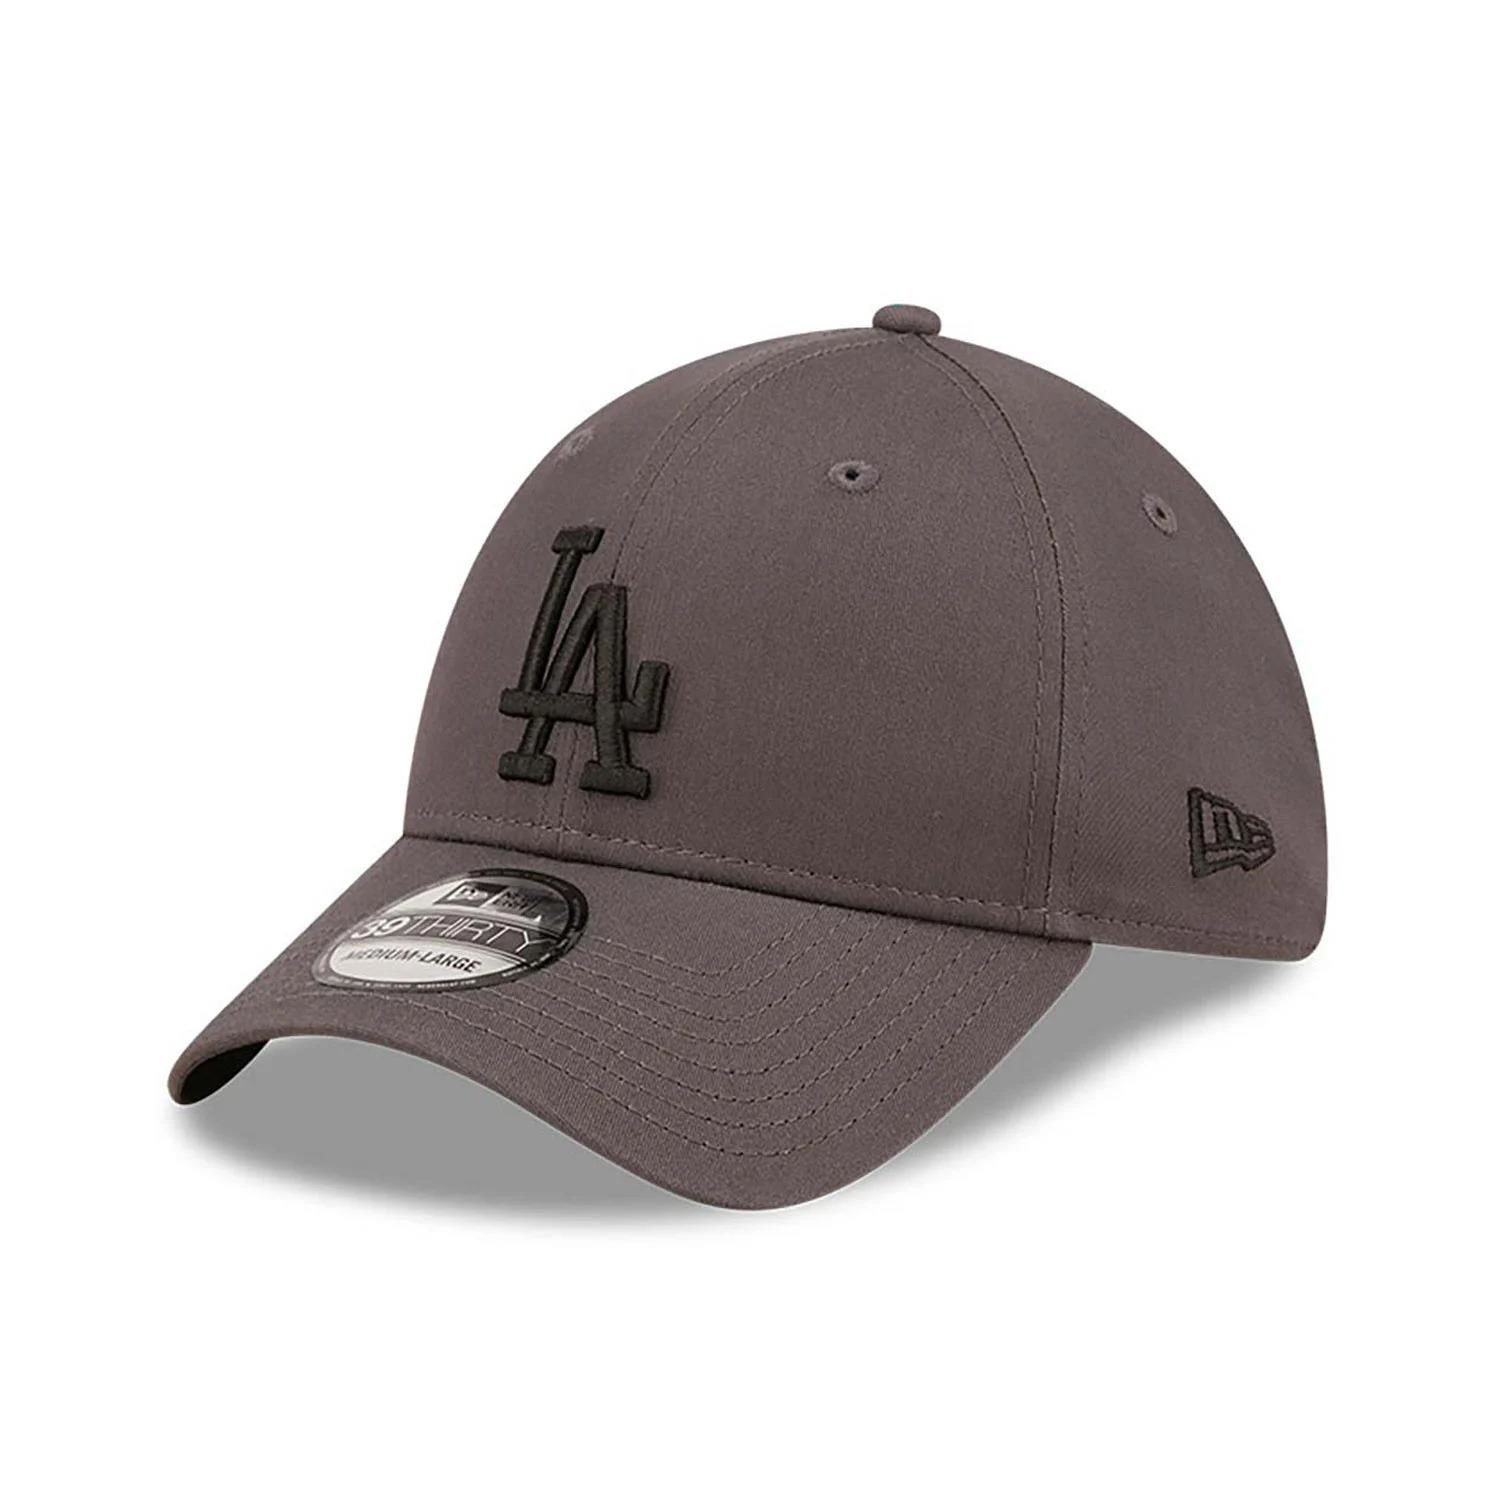 Picture of 39THITHT LOS ANGELES CAP  39THIRTY S-M Charcoal grey